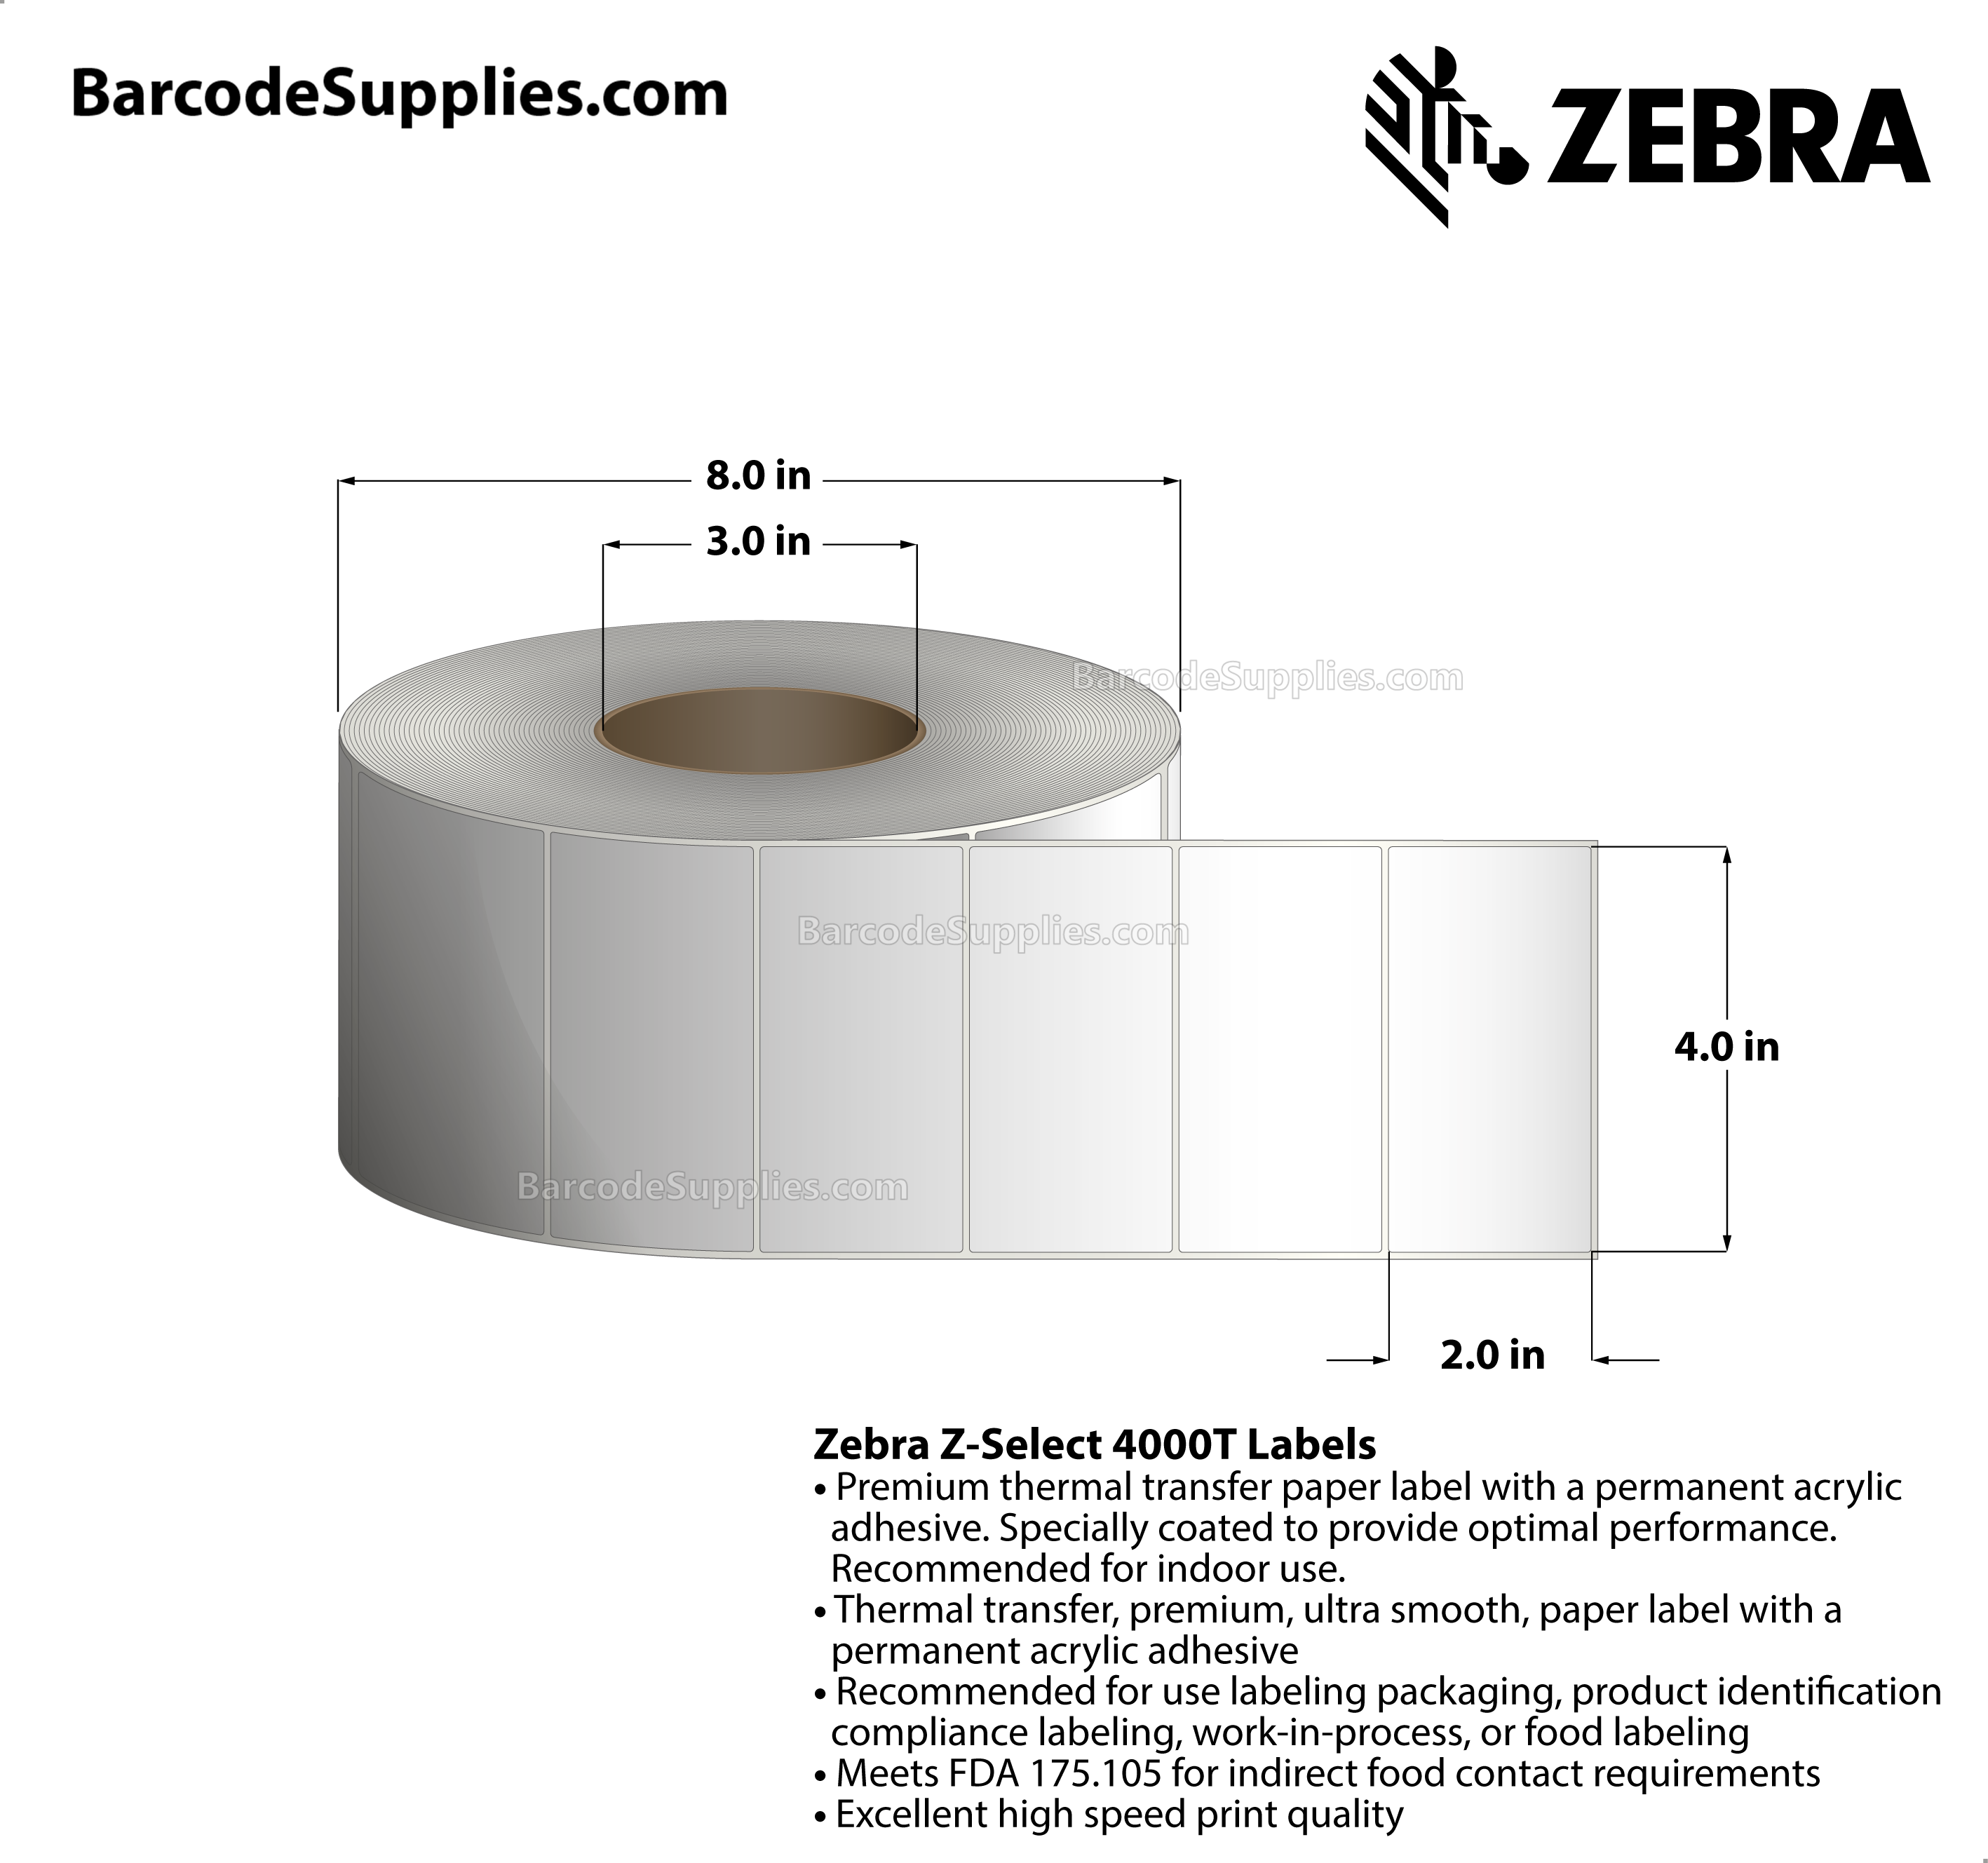 4 x 2 Thermal Transfer White Z-Select 4000T Labels With Permanent Adhesive - Not Perforated - 2740 Labels Per Roll - Carton Of 4 Rolls - 10960 Labels Total - MPN: 72289